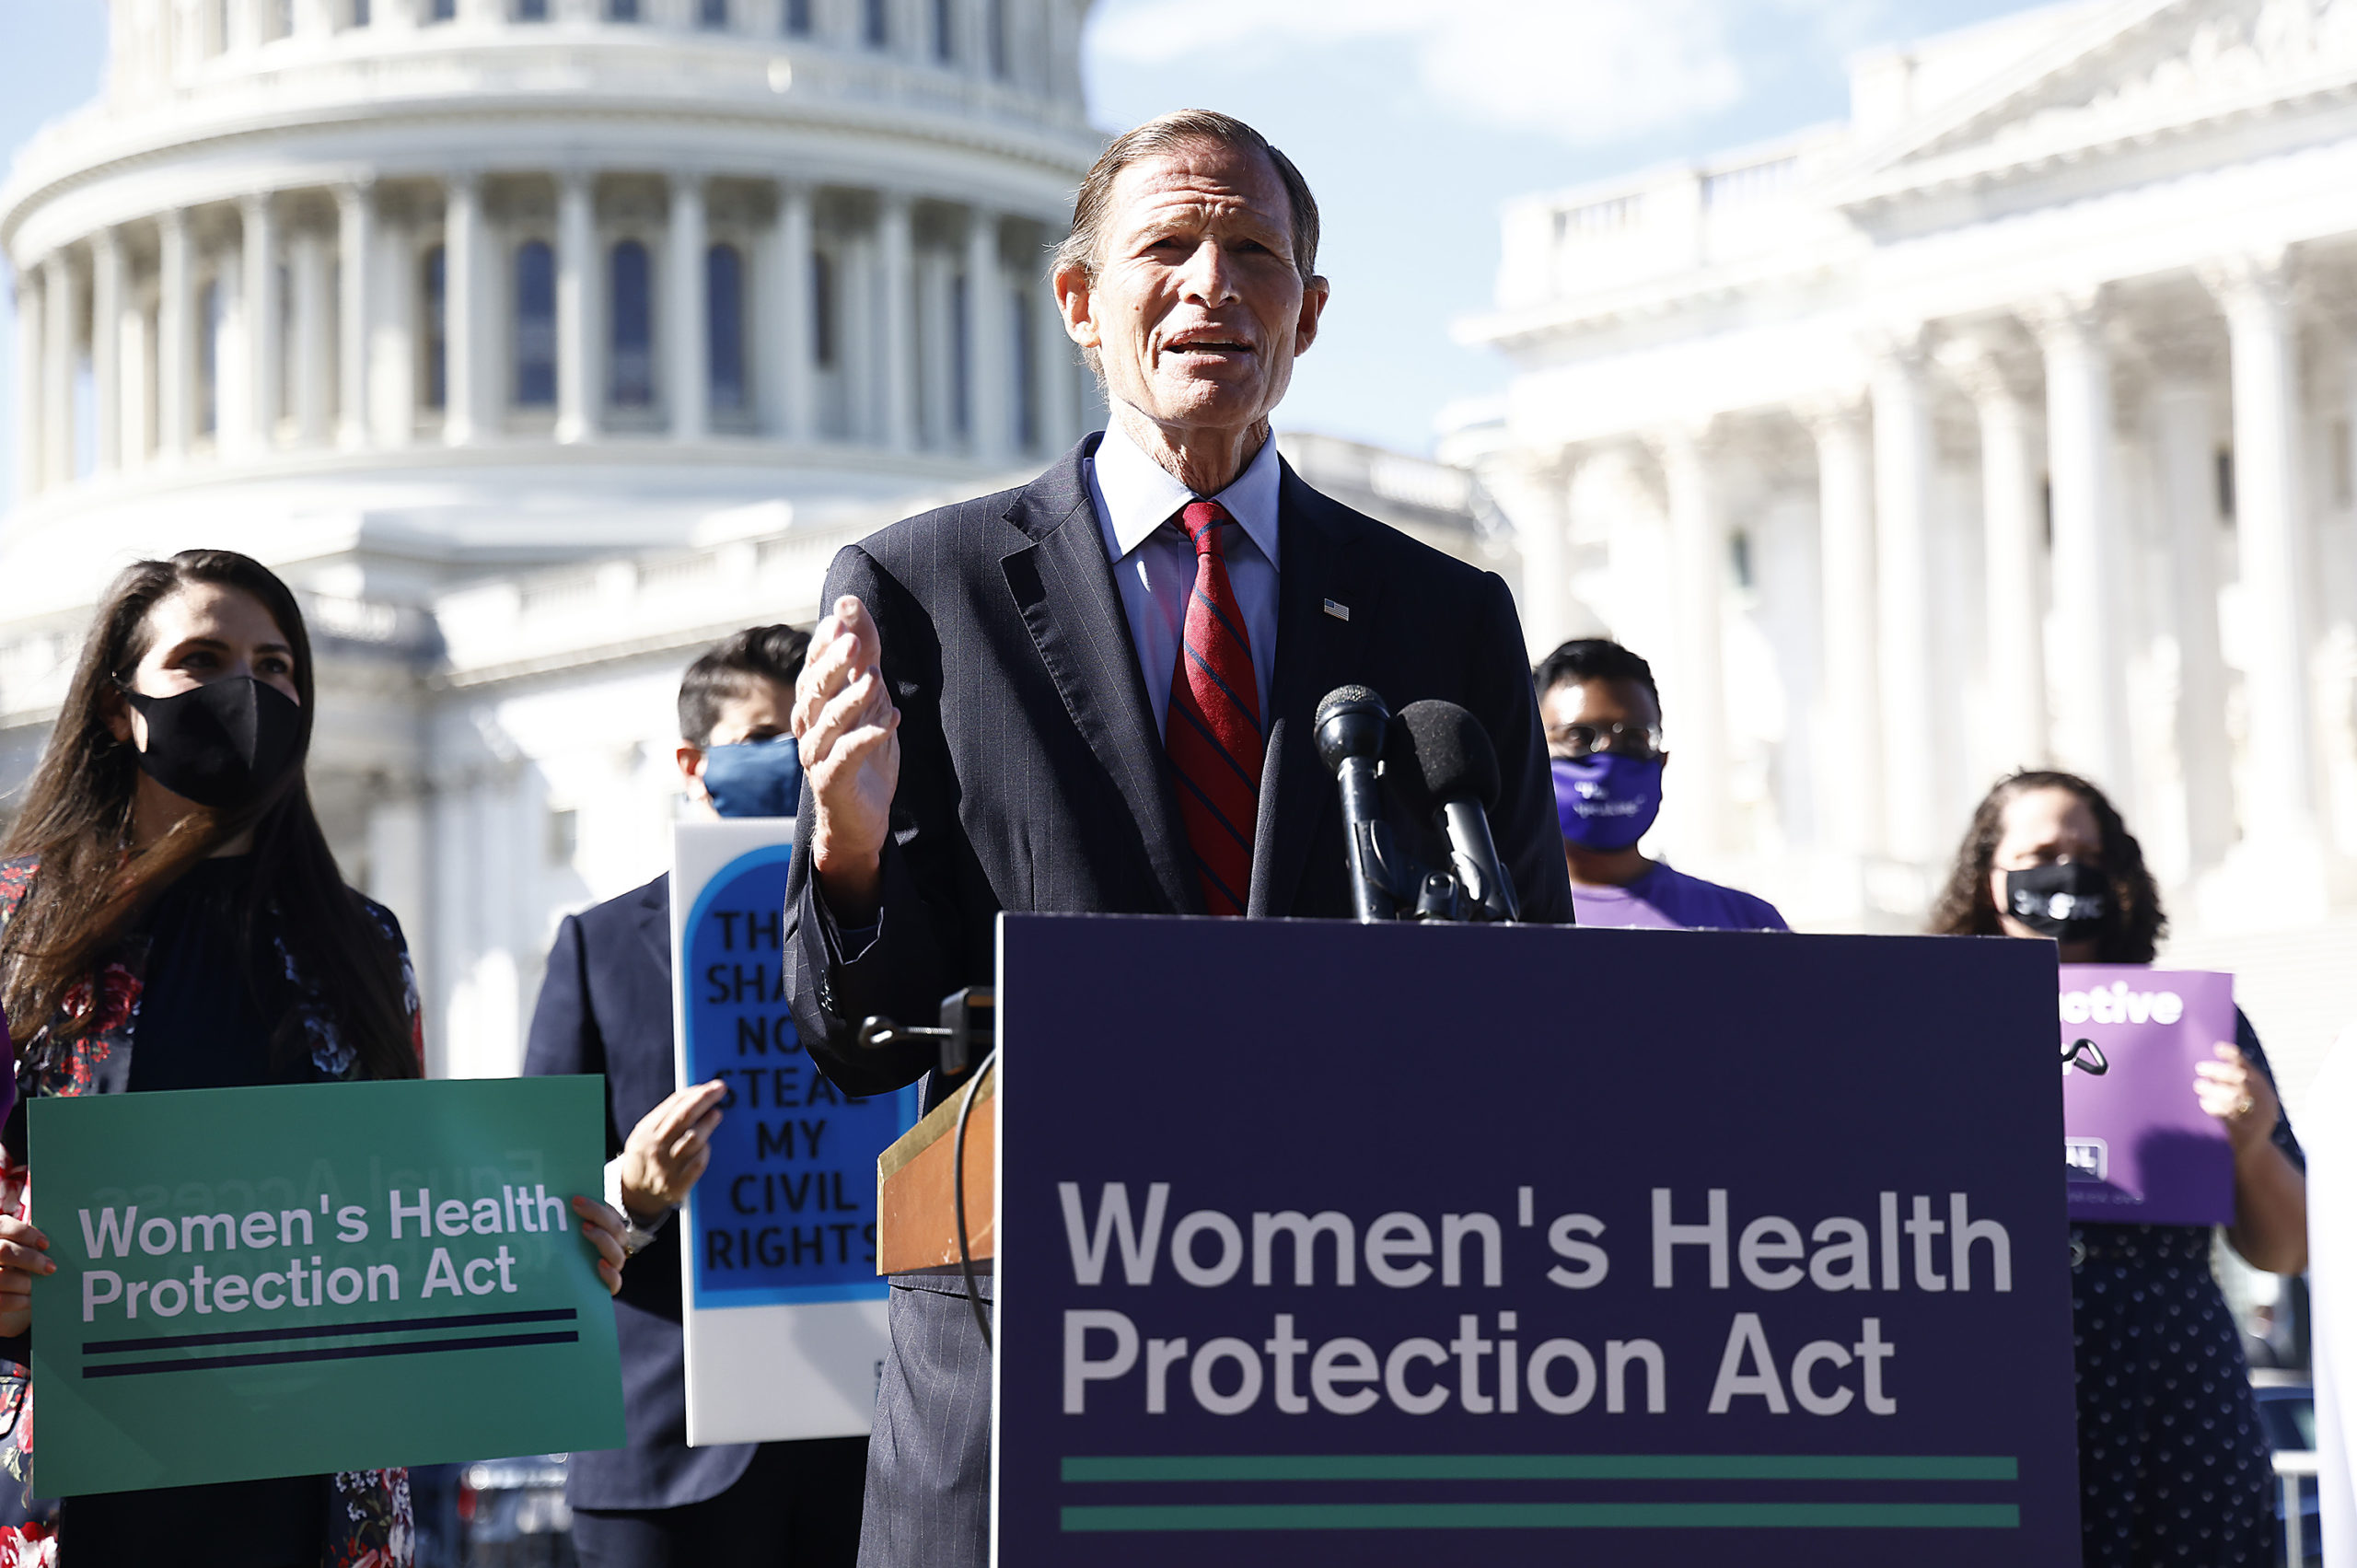 Senator Richard Blumenthal (D-CT) speaks at an event on behalf of the over 400,000 people who signed petitions of support from UltraViolet, NARAL, MoveOn, MomsRising, Catholics for Choice and National Council of Jewish Women to urge the Senate to protect abortion rights at an event outside of the U.S Capitol Building on September 29, 2021 in Washington, DC. (Photo by Paul Morigi/Getty Images for MoveOn)